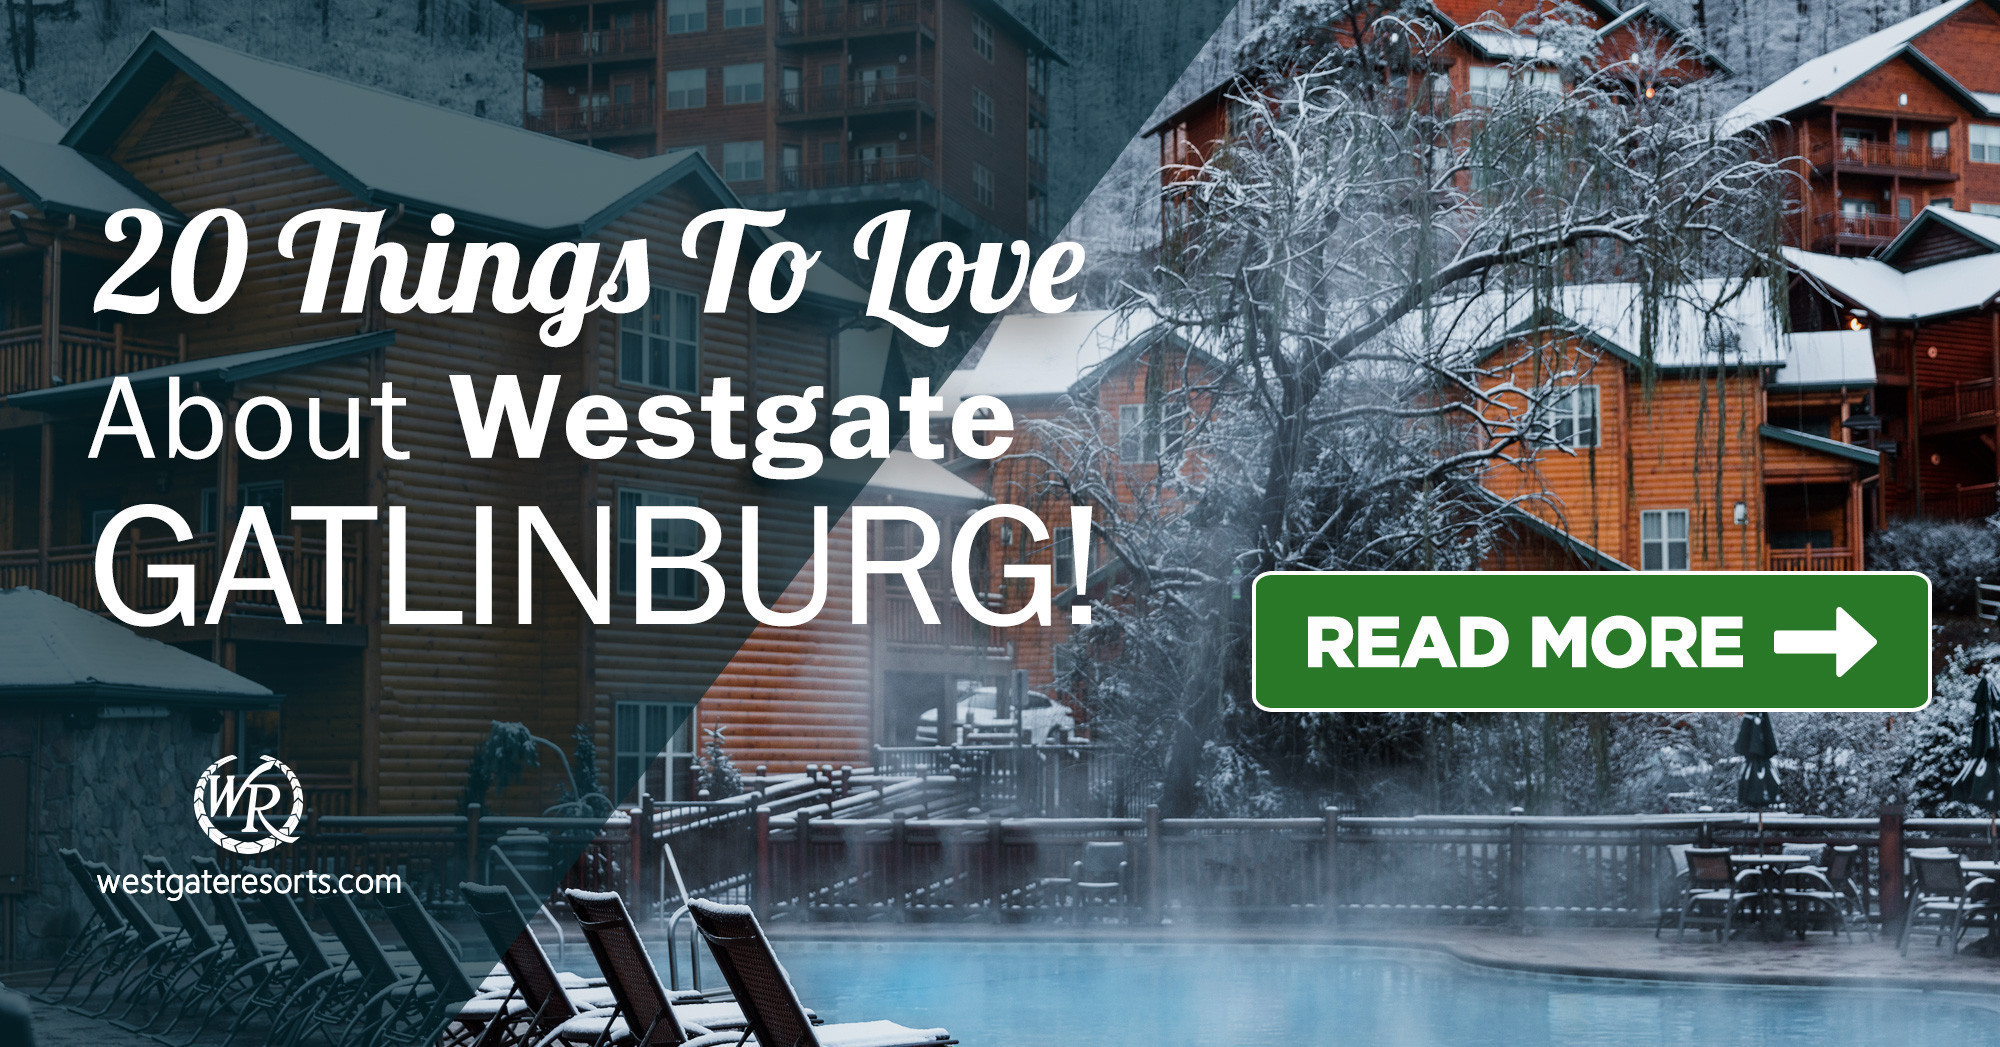 20 Things To Love About Westgate Gatlinburg!